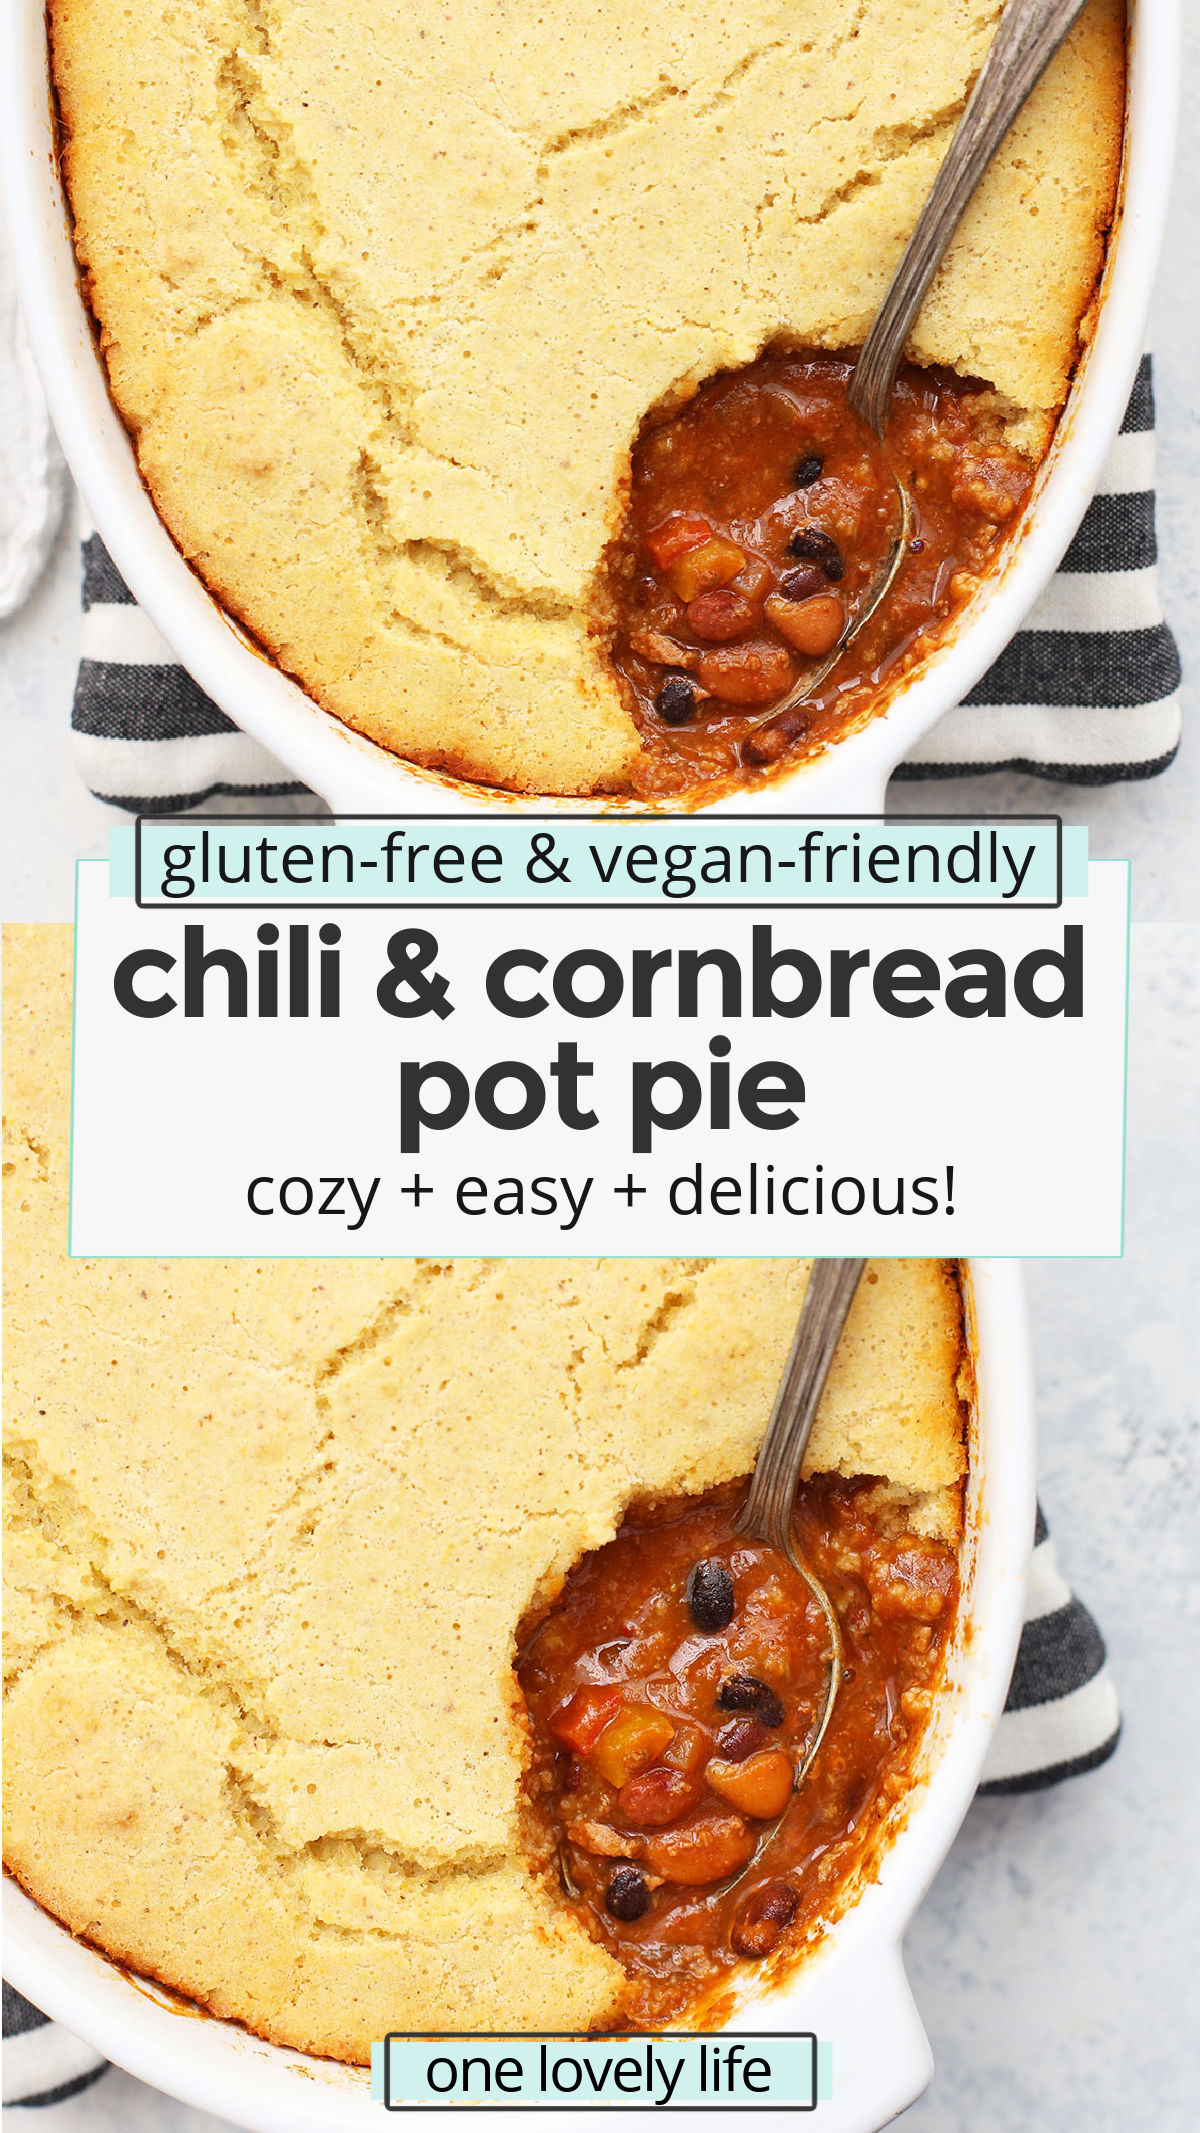 Chili Cornbread Pot Pie - This cozy chili & cornbread pot pie combines two favorites into one delicious meal. Gluten free, dairy free, and easily vegan! // tamale pie recipe // chili and cornbread // vegan chili // vegan cornbread // gluten free chili // gluten free cornbread // chili and cornbread pot pie recipe